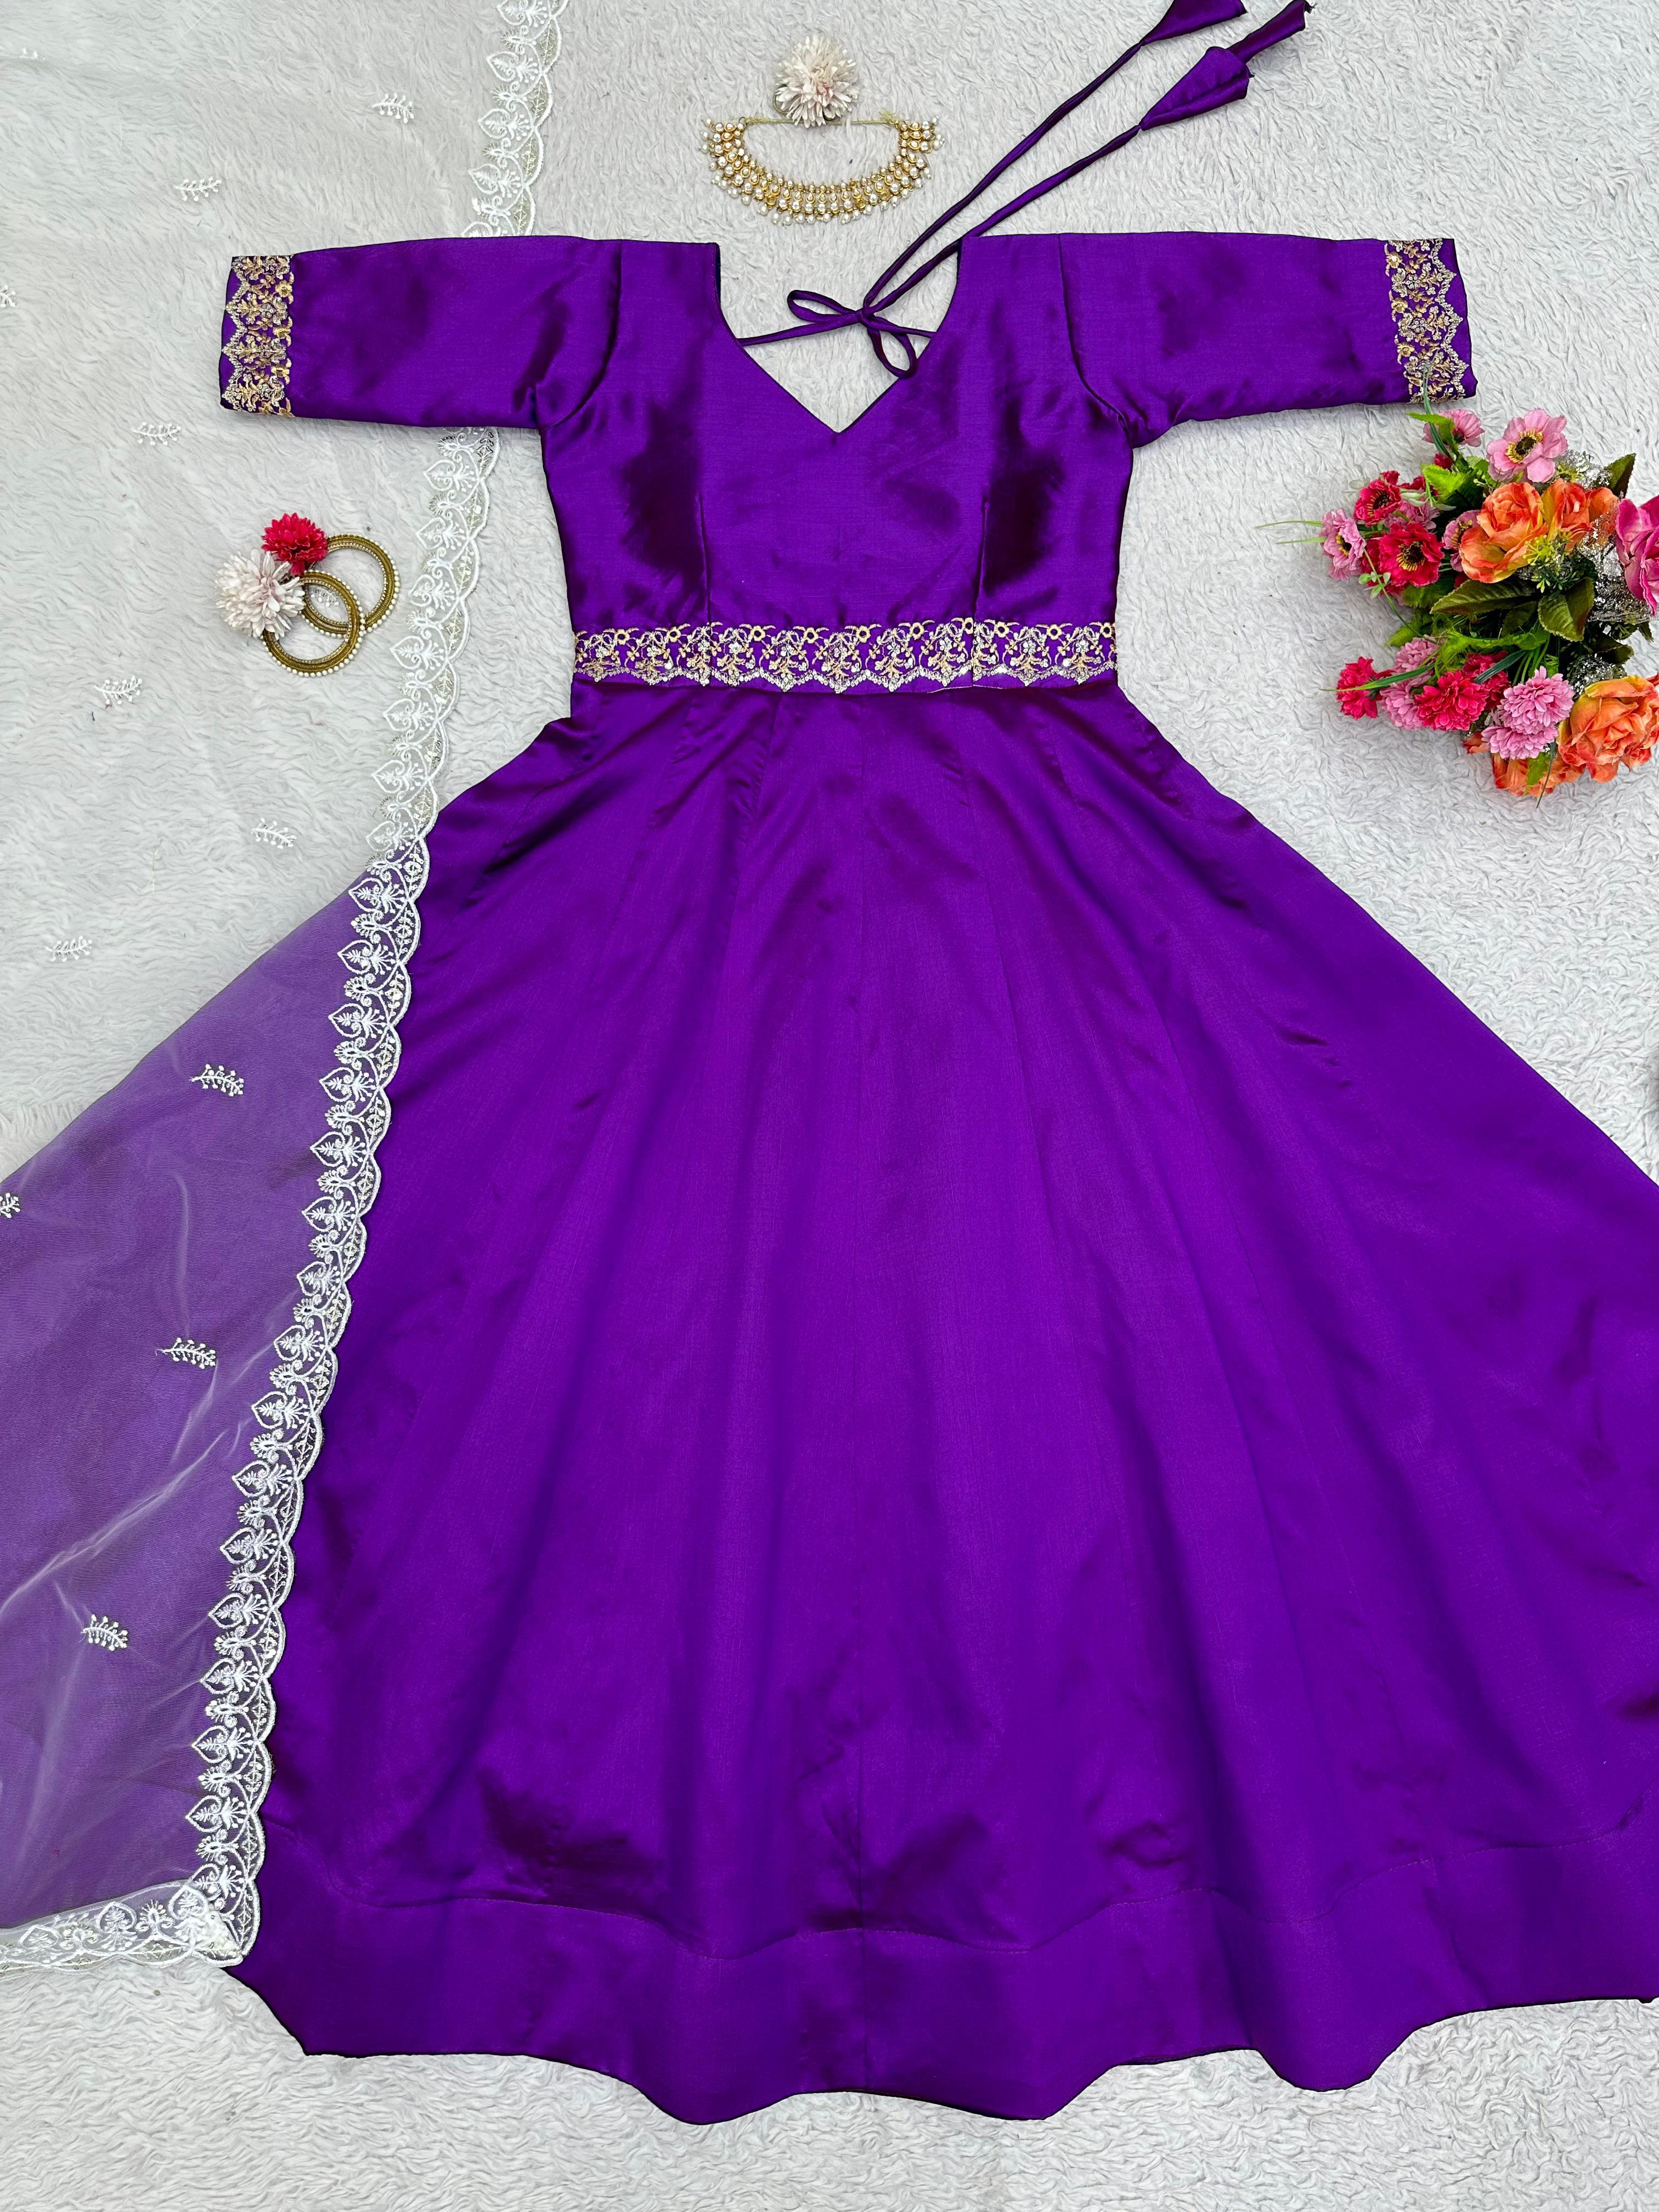 Flattering Purple Color Gown With White Dupatta